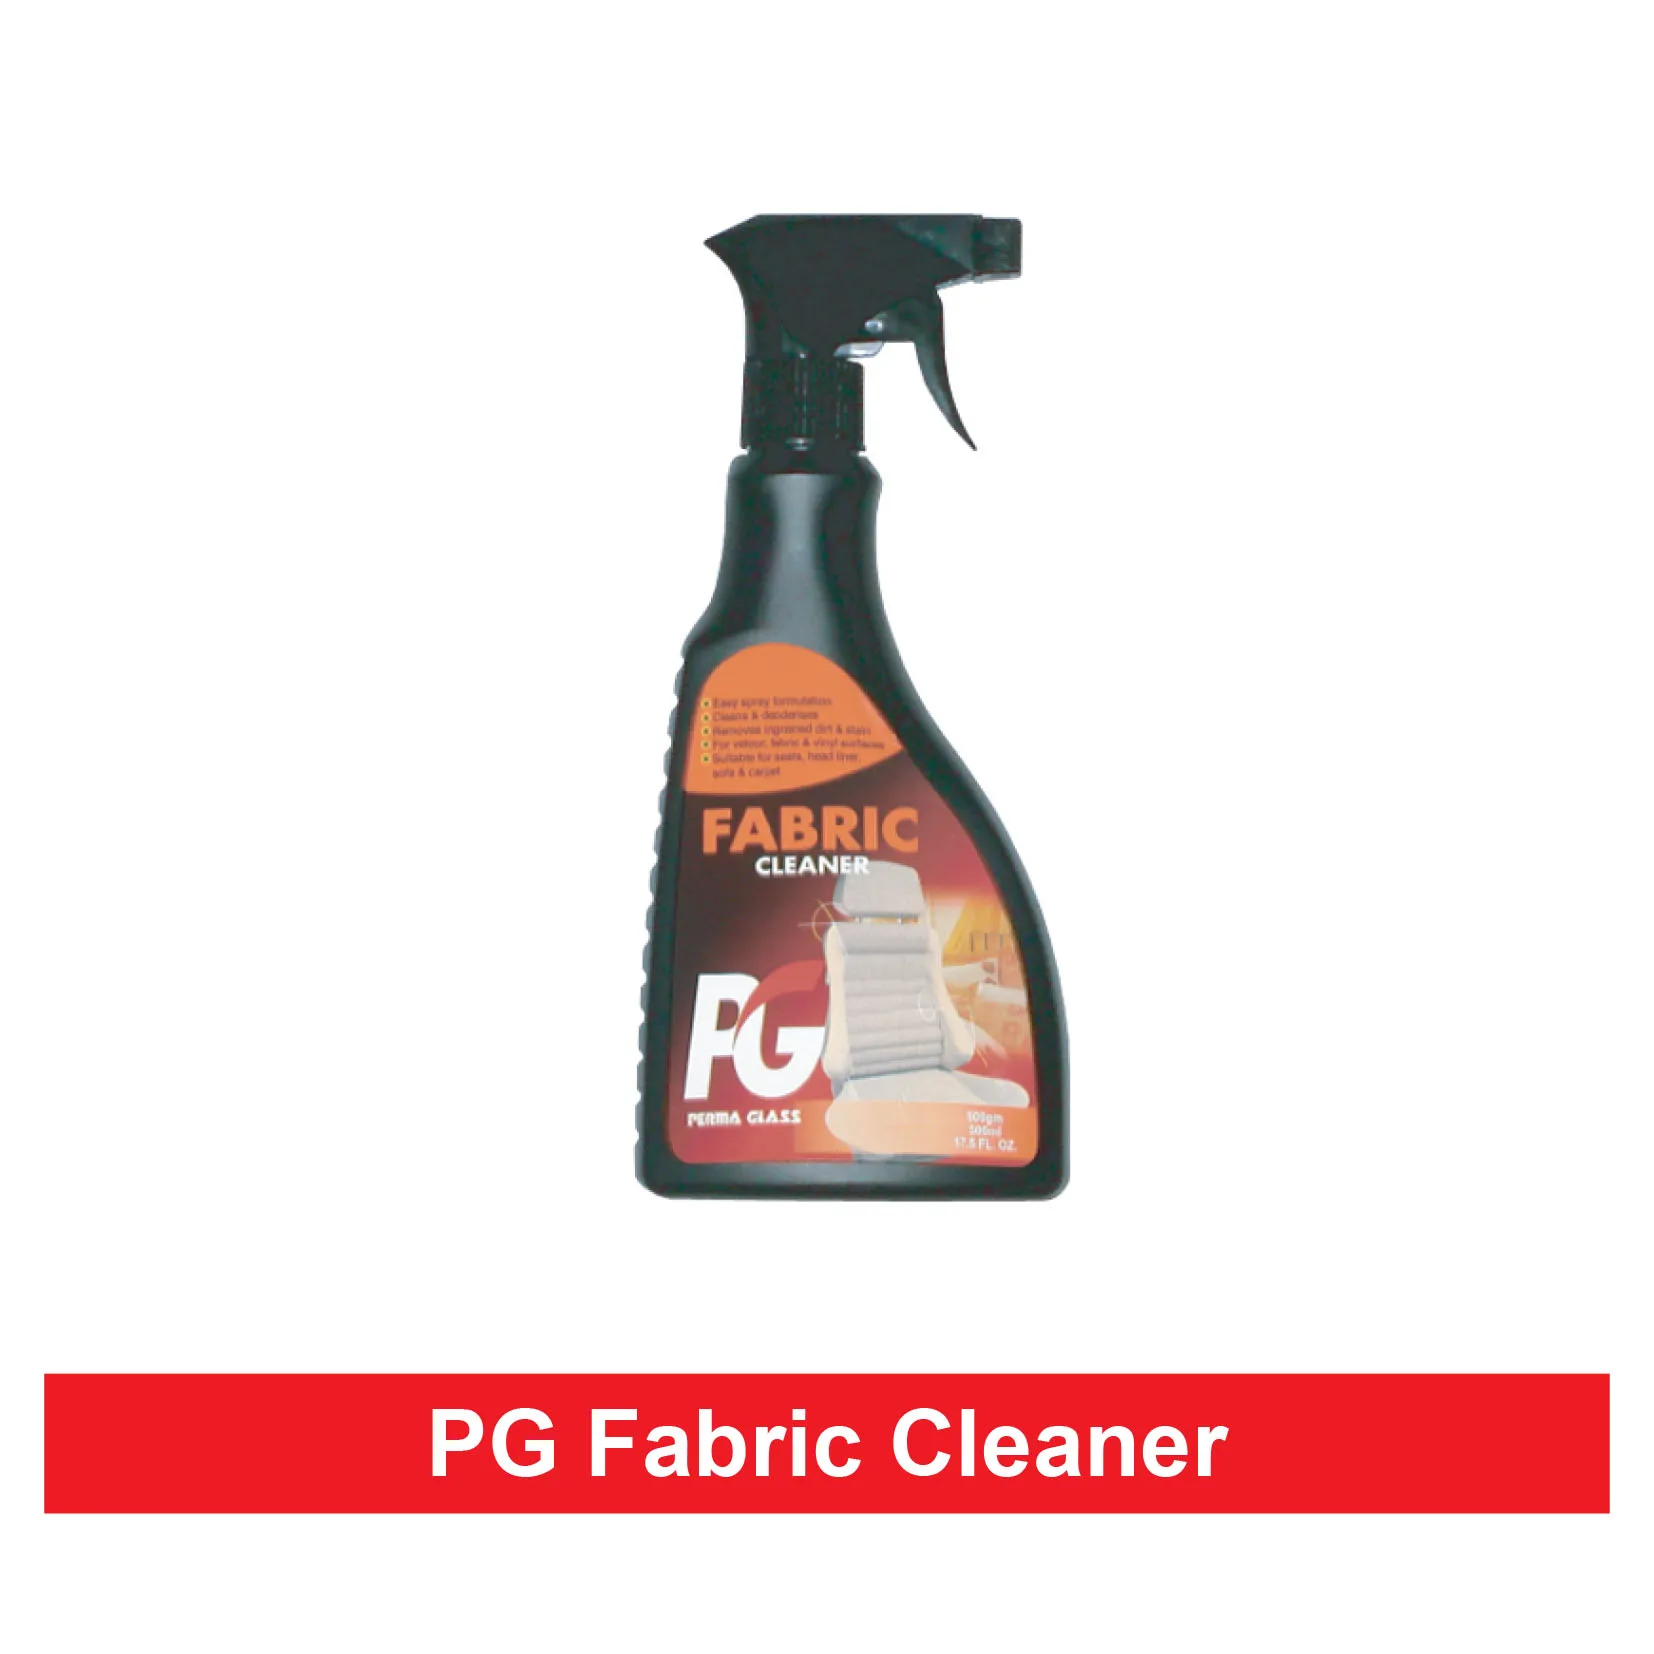 ISI Carpet, Upholstery, and Fabric Cleaner Spray